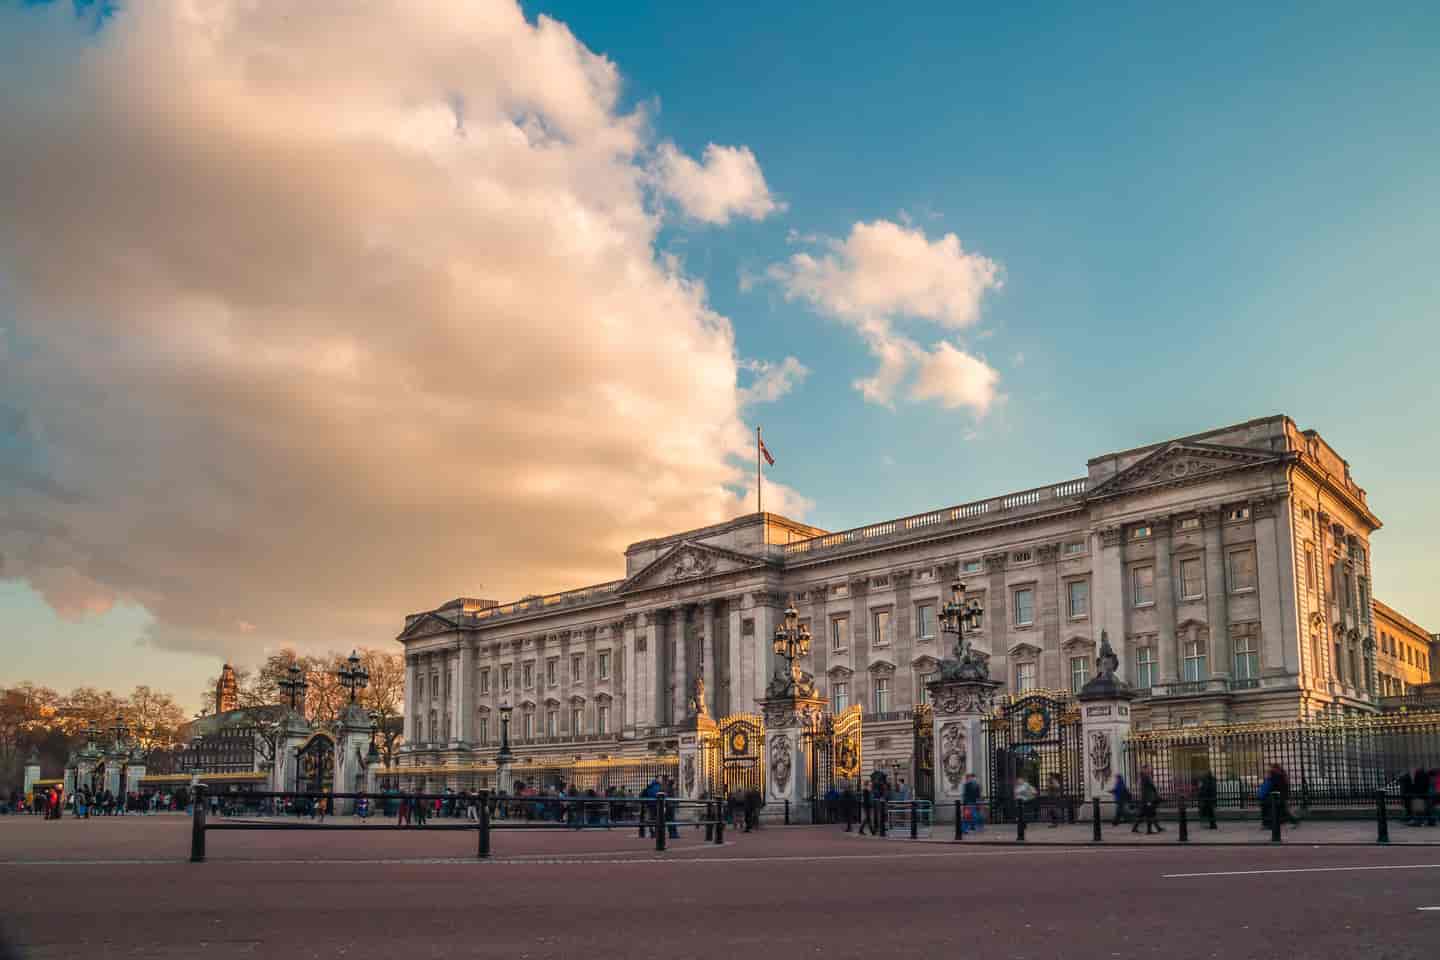 Student Accommodation in London - Tourists at Buckingham Palace on a cloudy day